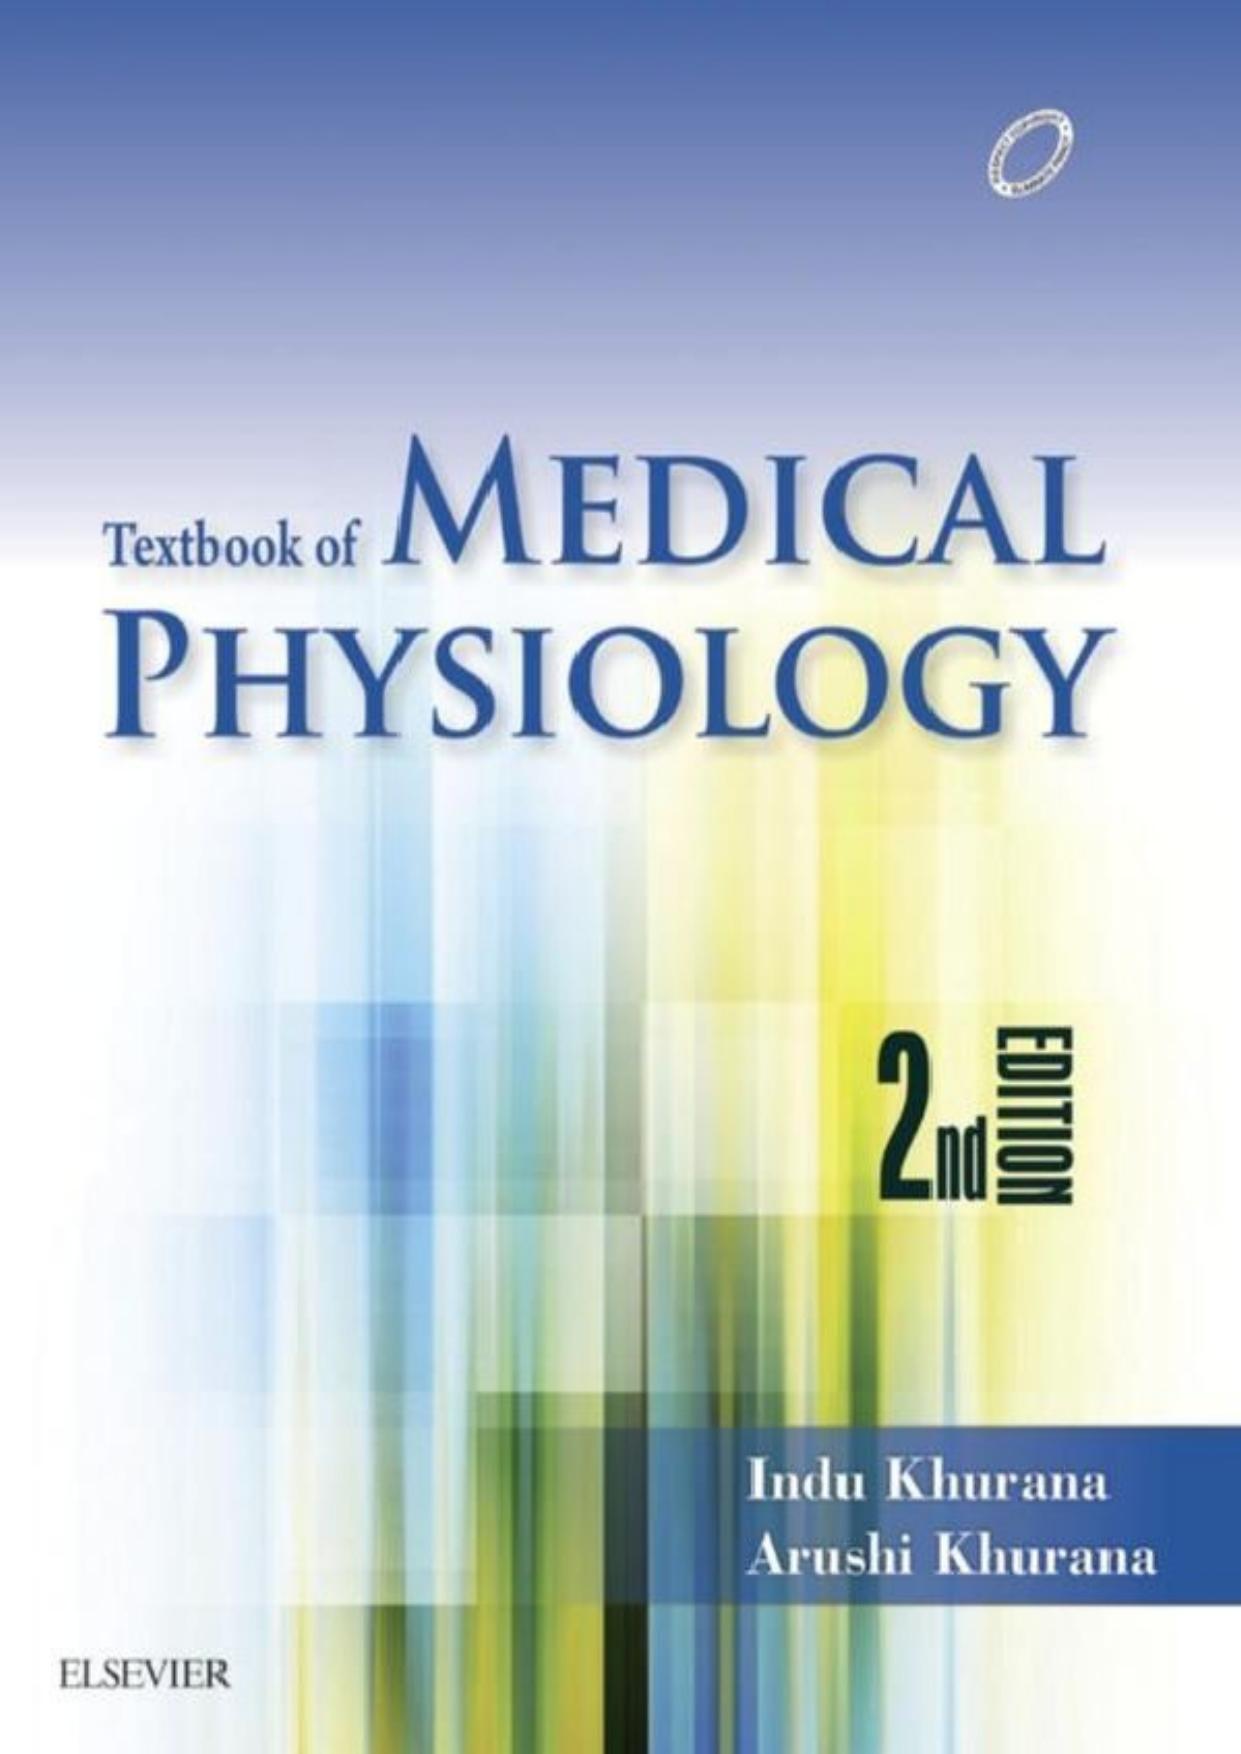 Textbook of Medical Physiology - E-Book